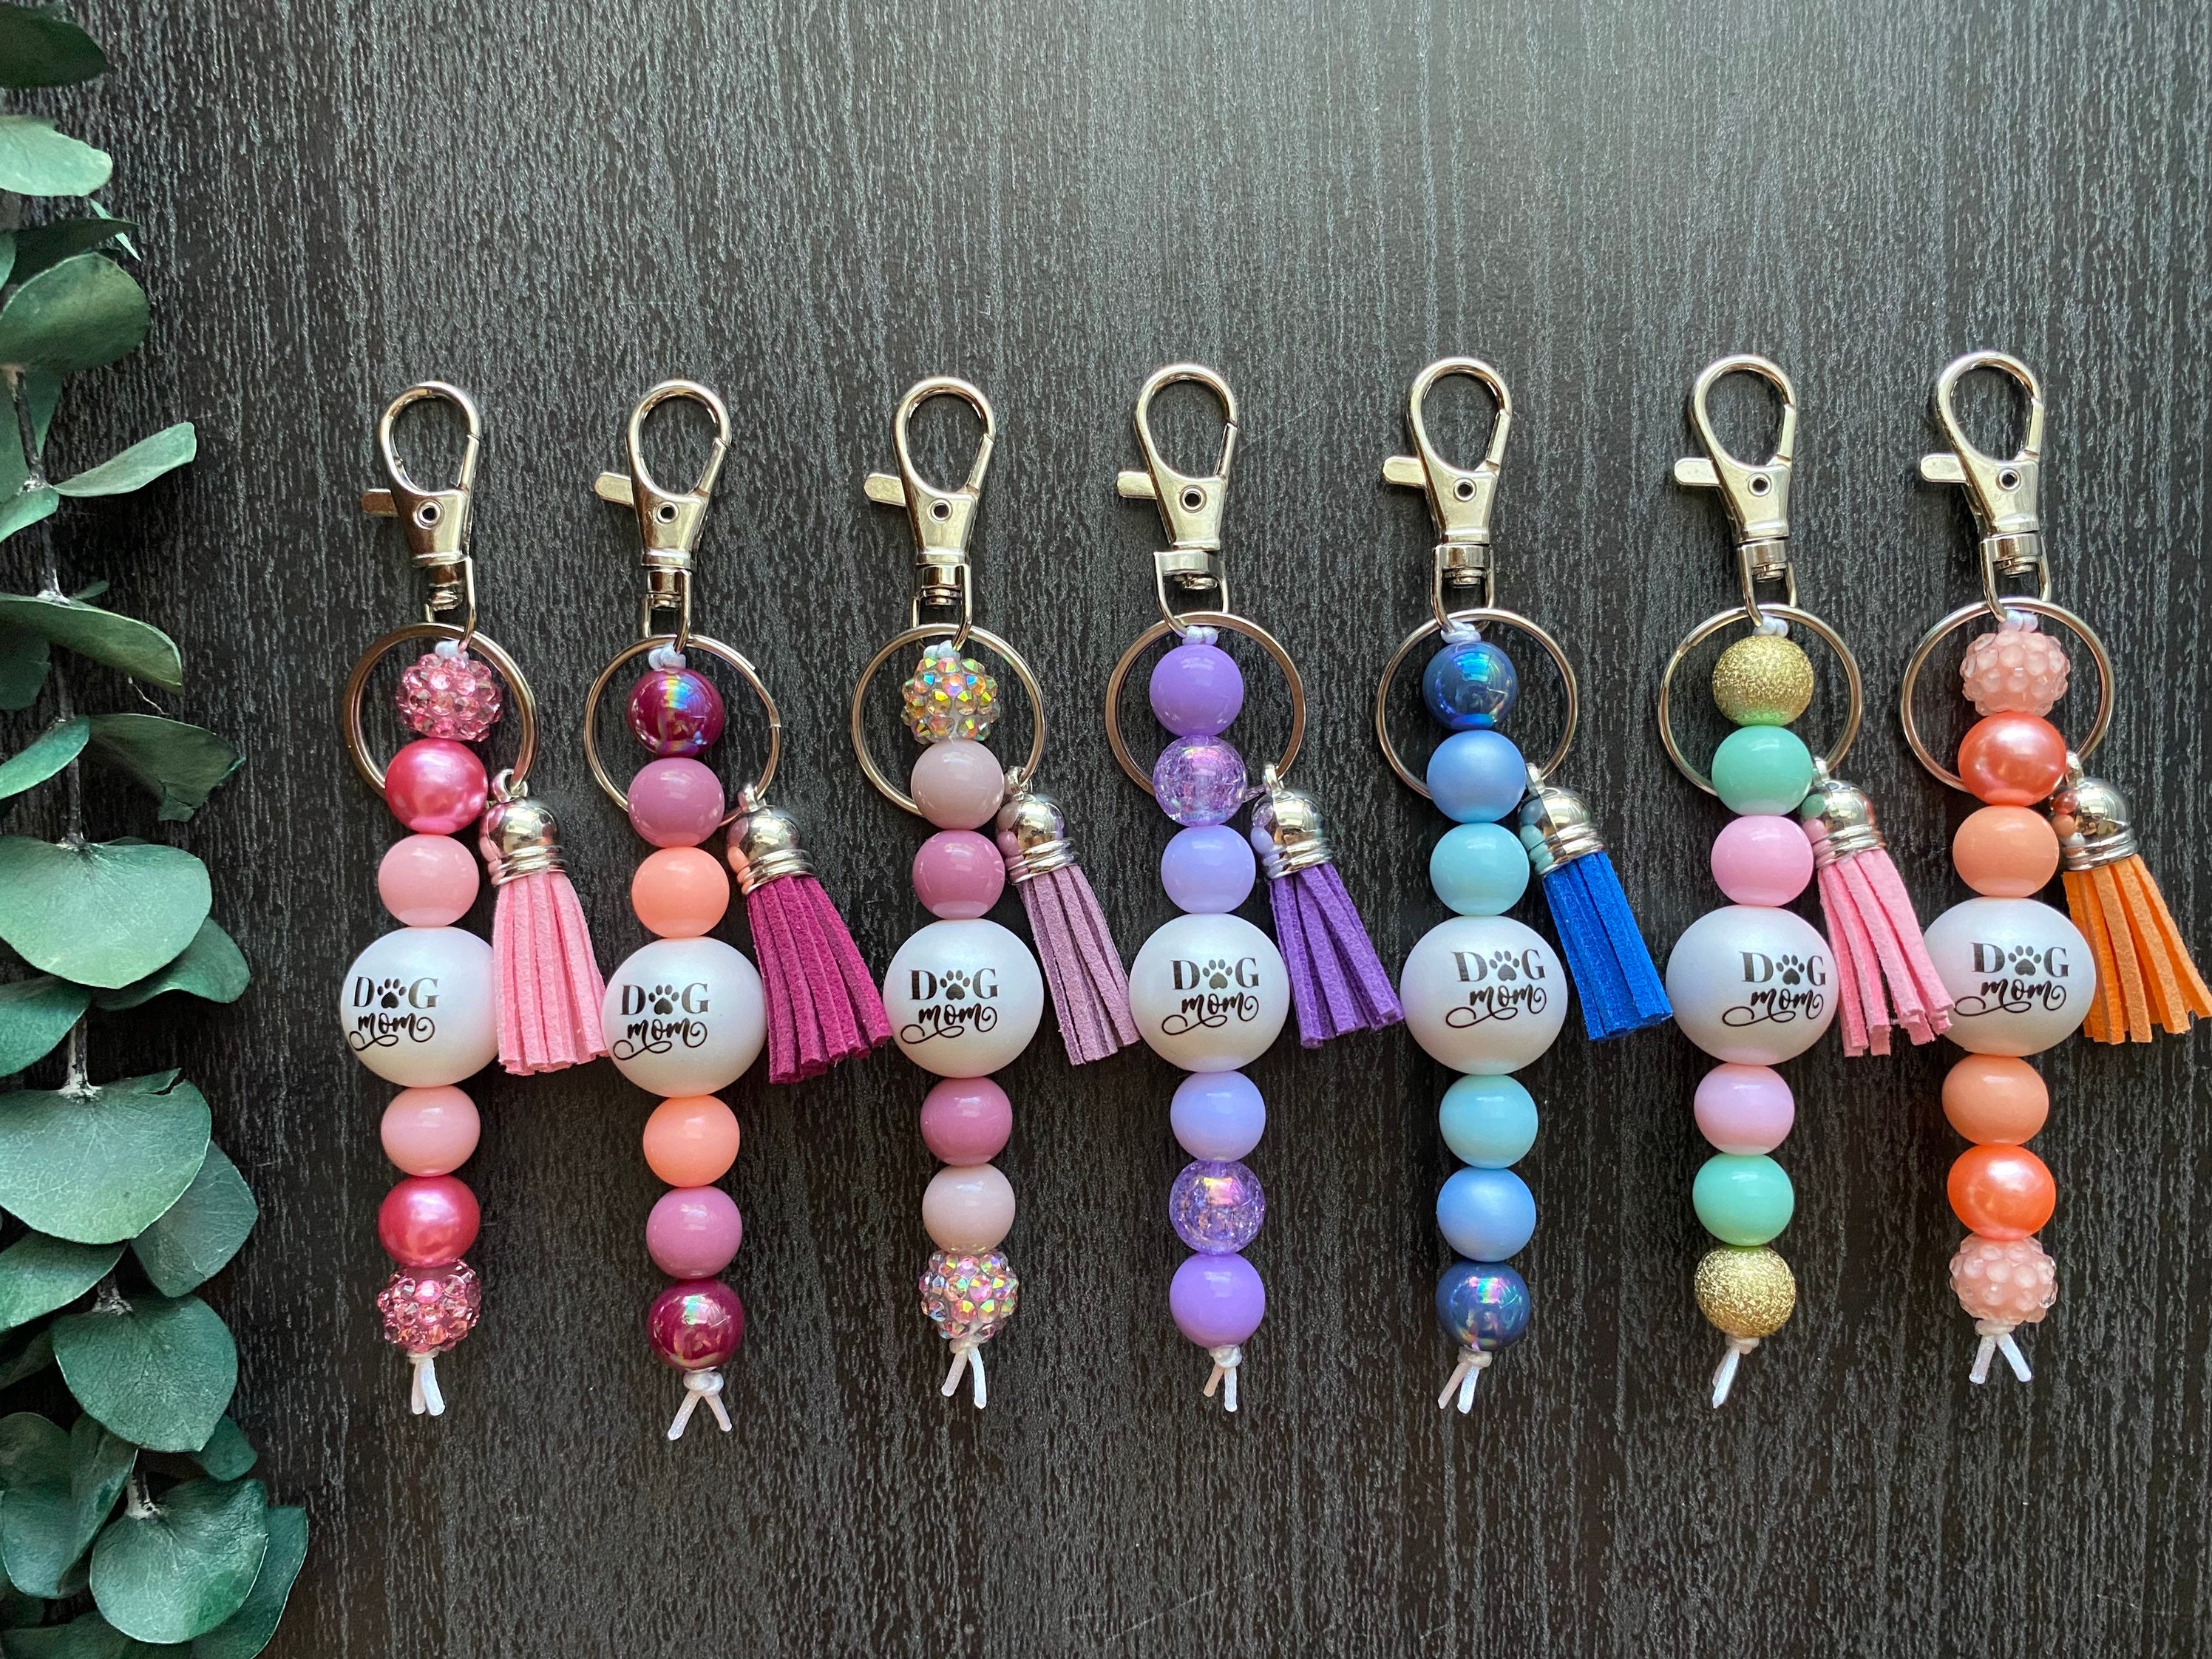 Mama Rainbow Clear Acrylic Keychain Blanks With Tassel as Shown in the  Photo Select Color 50mm Diameter 